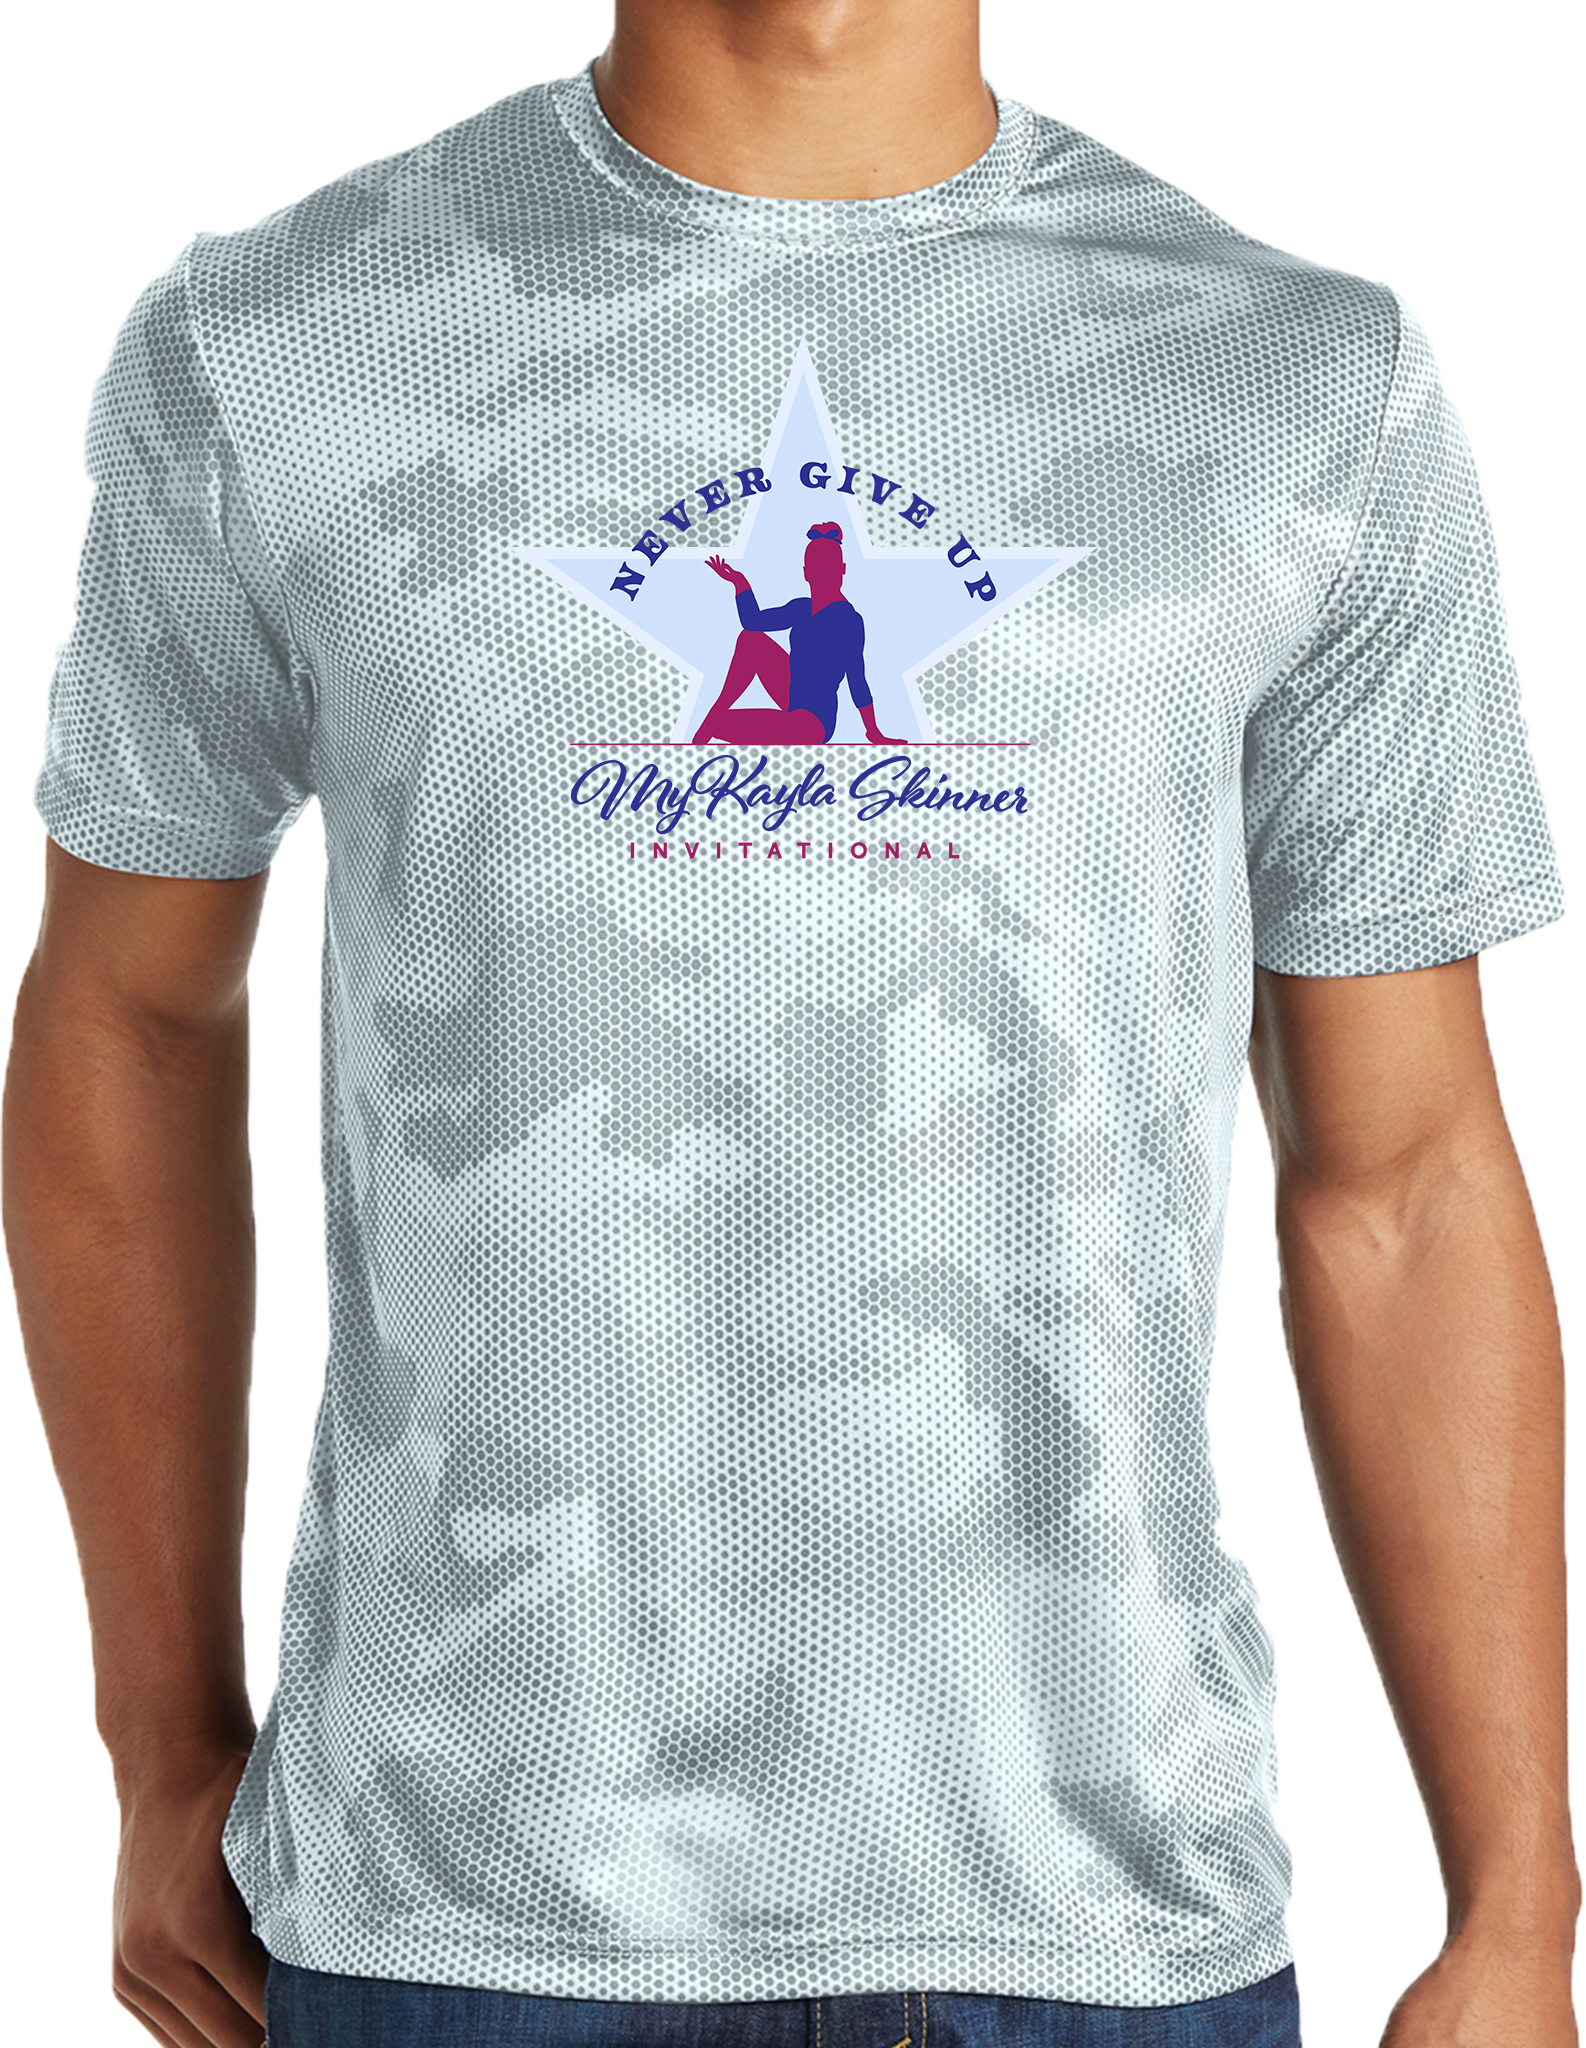 PERFORMANCE SHIRTS - 2023 Never Give Up with MyKayla Skinner